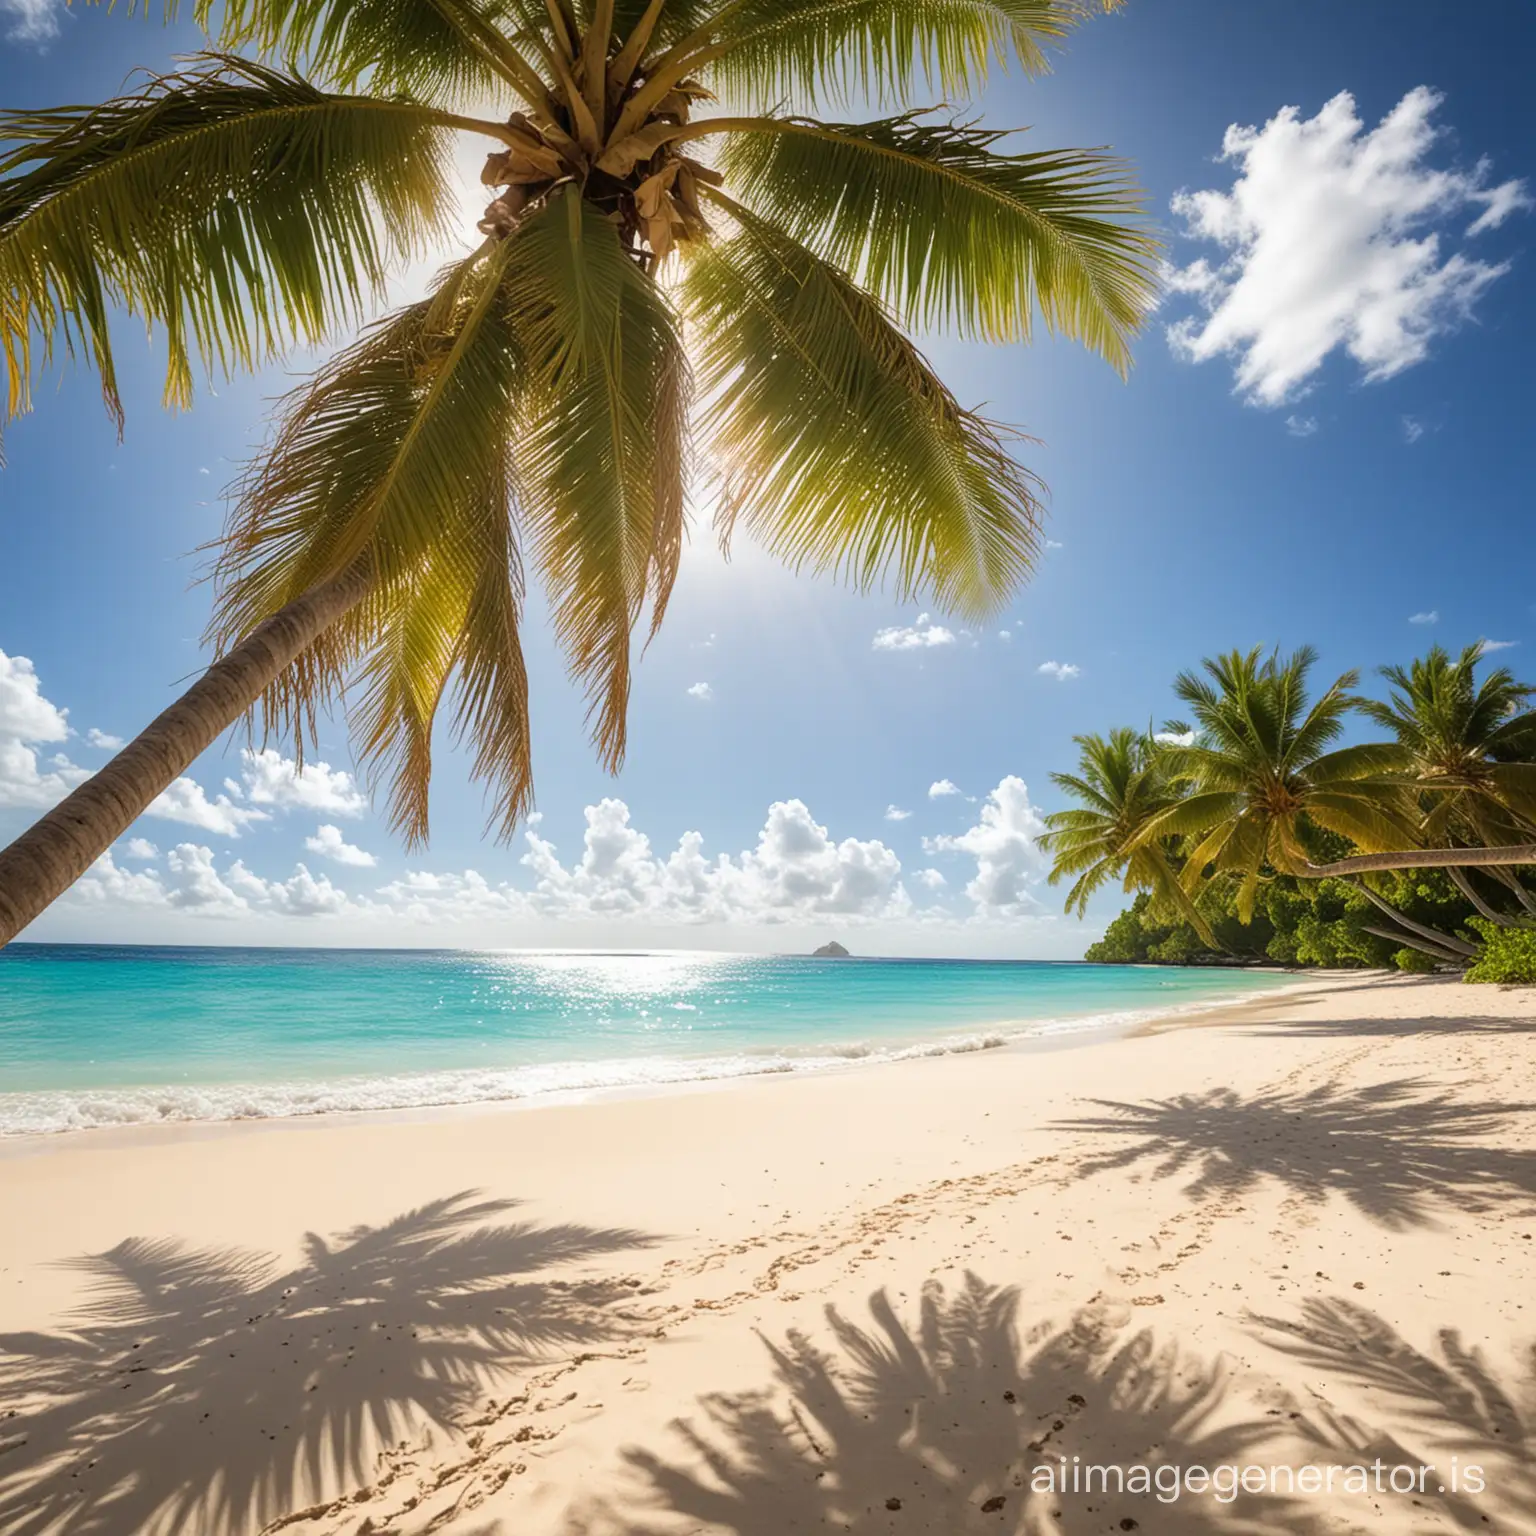 A lovely beach in the Caribbean with the sun shining and palm trees